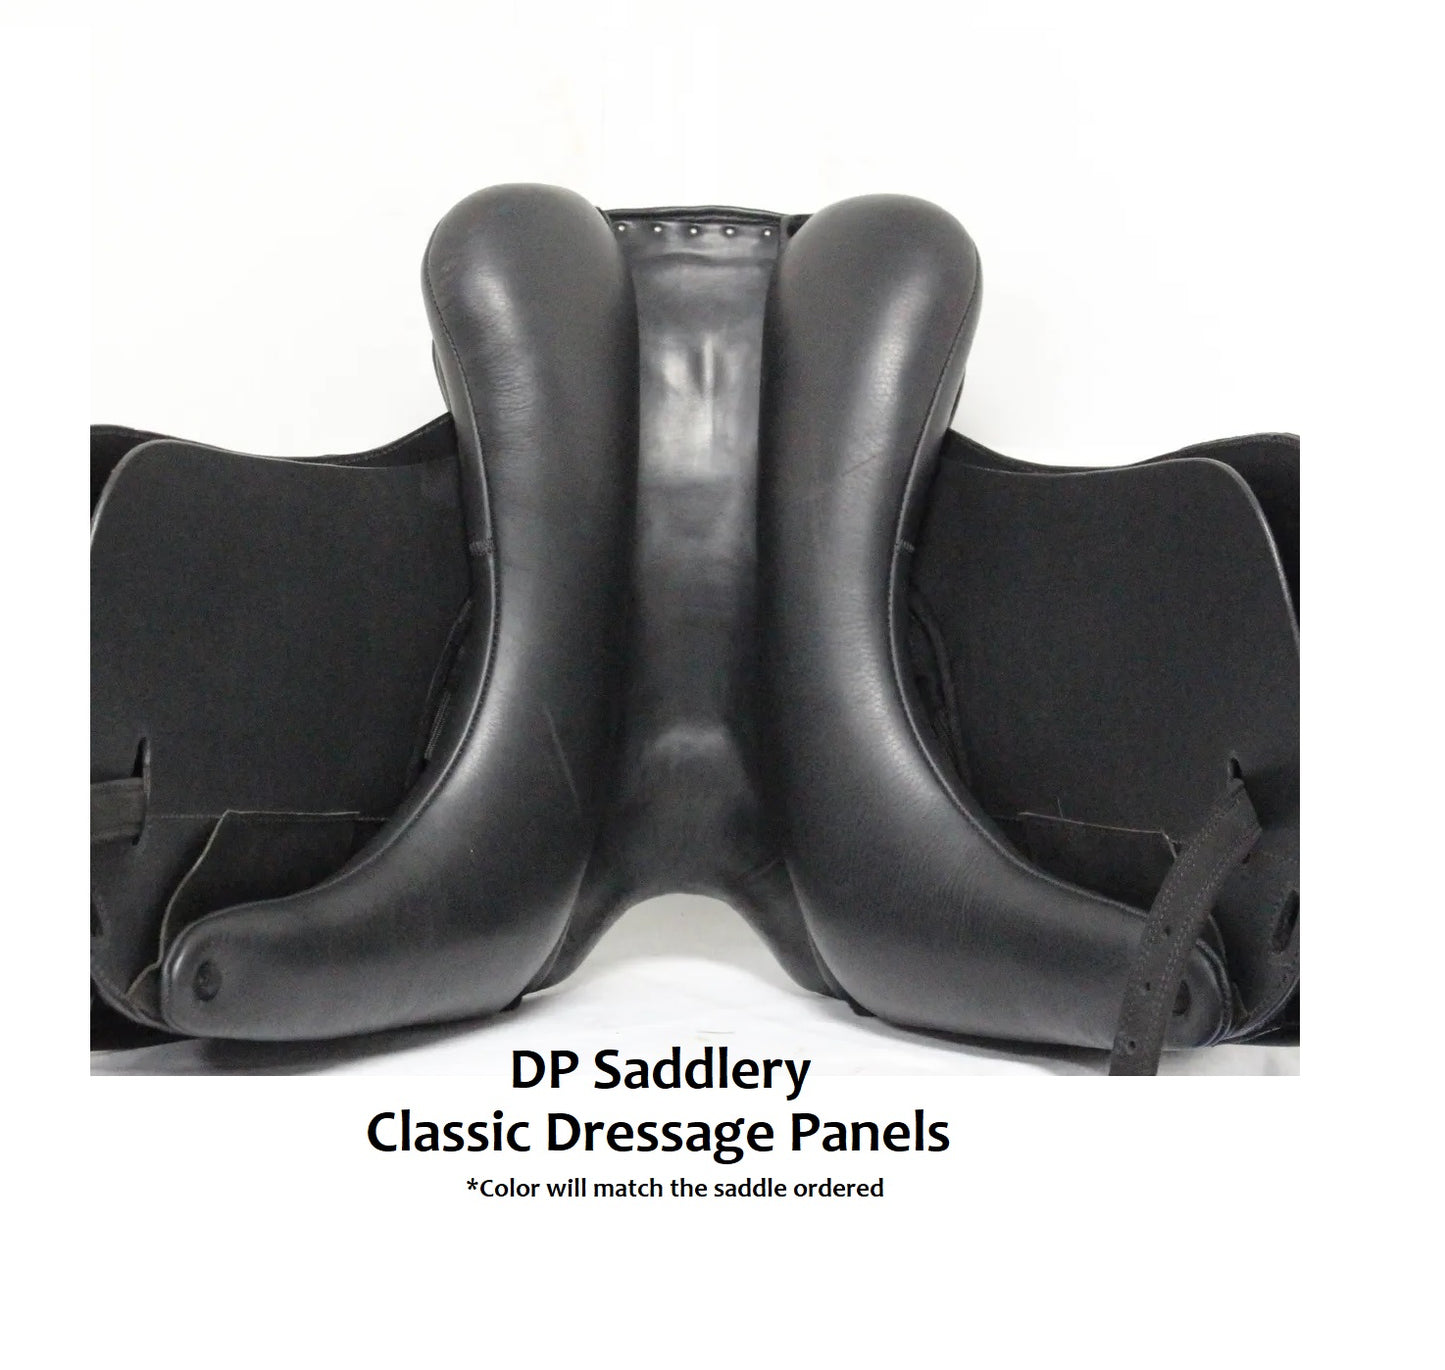 DP Saddlery Classic Dressage 6535 17.5 in